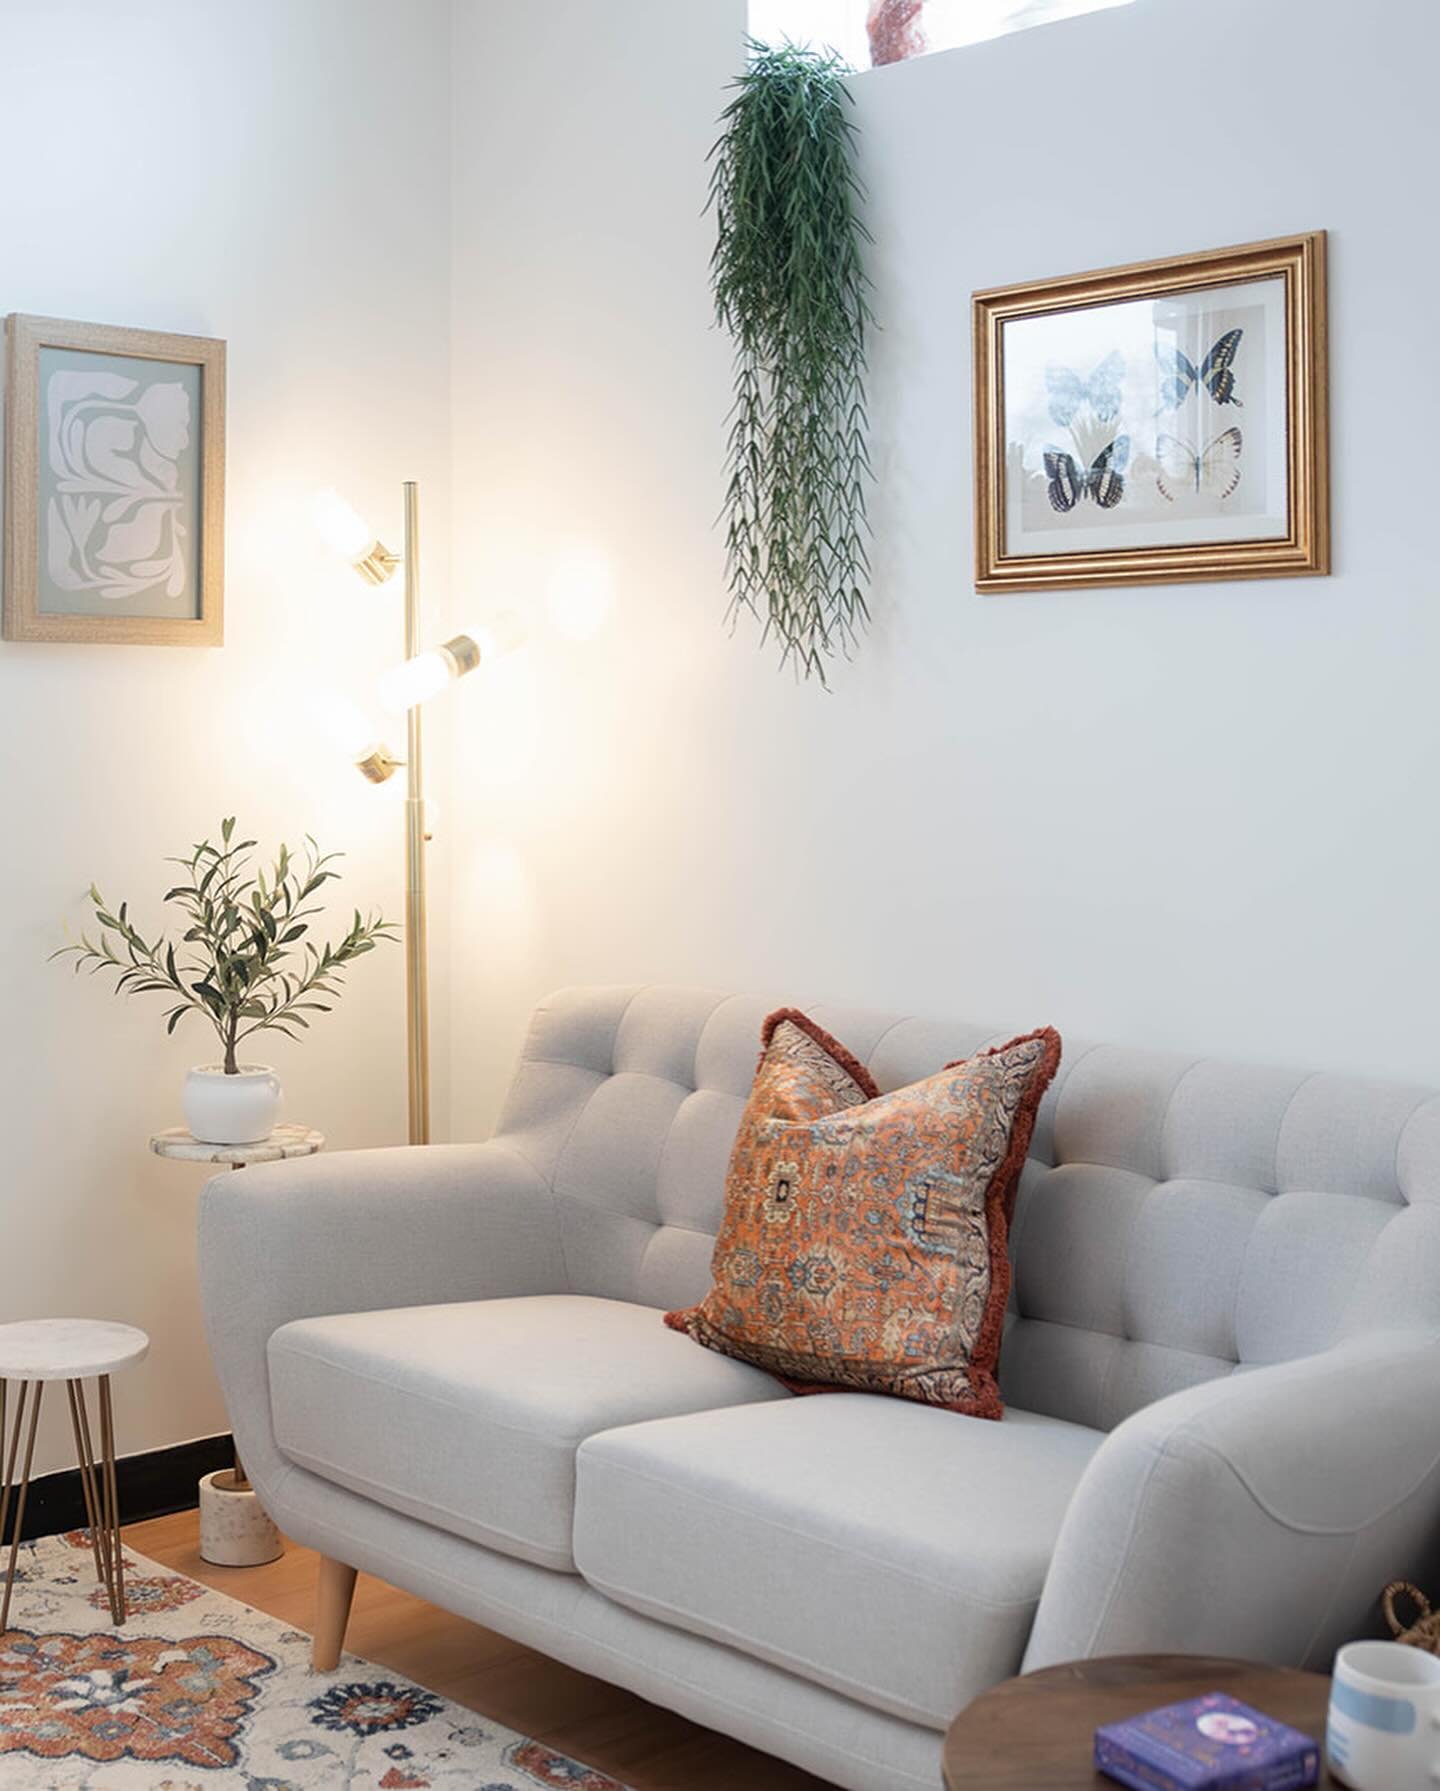 🛋️ Have you seen our newest space yet? 

Take a quick tour around ✨ office 7 ✨

The cozy couch, the hand-picked art work and trinkets, the warm lighting. Say less! We love hanging in here!

The best part? 

Having the space filled with your stories,